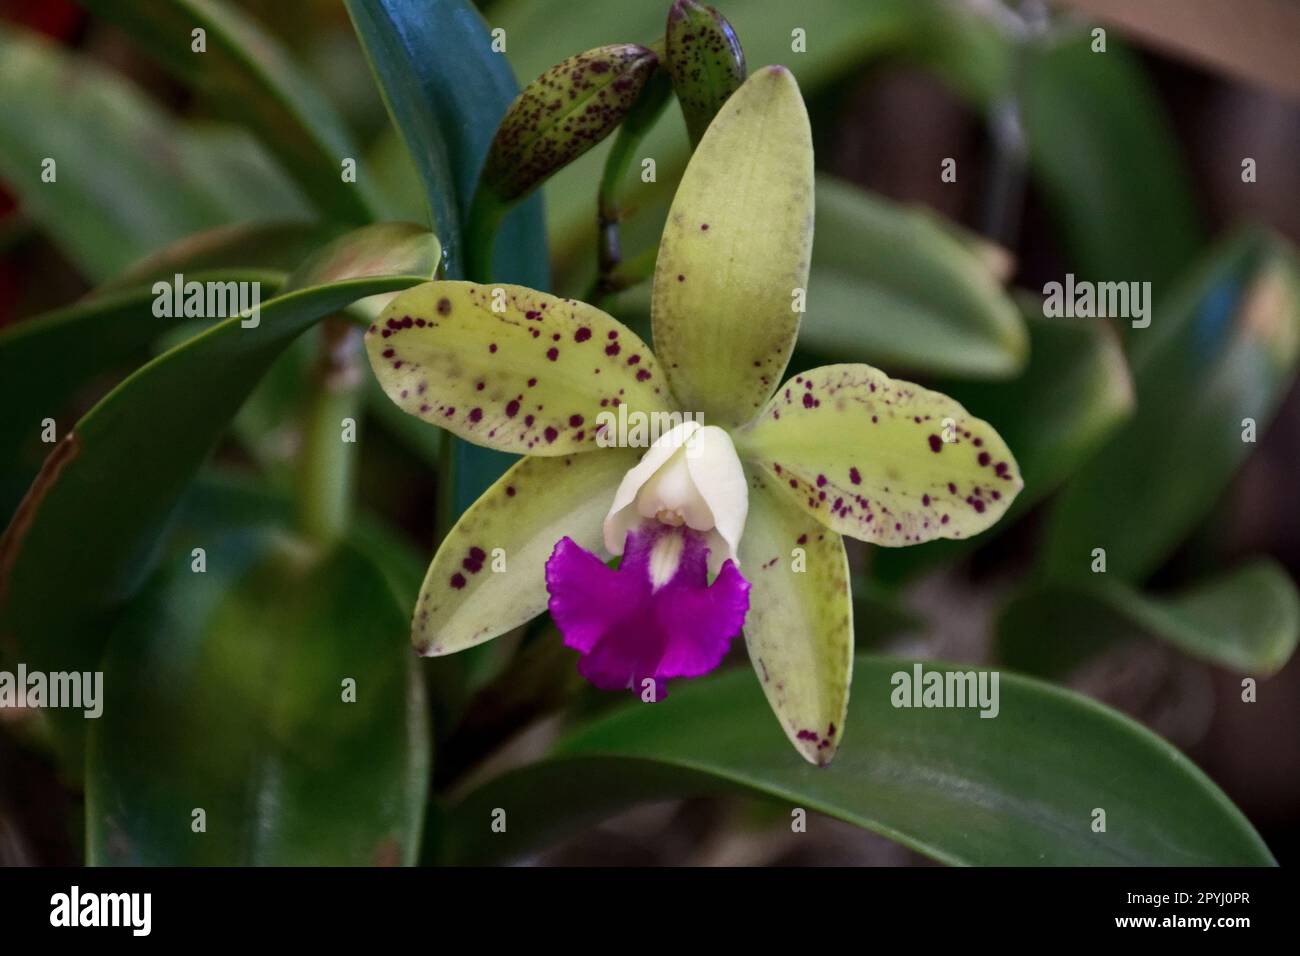 Tropical yellowish green orchid with purple petal and green leaves bloomed in autumn Stock Photo